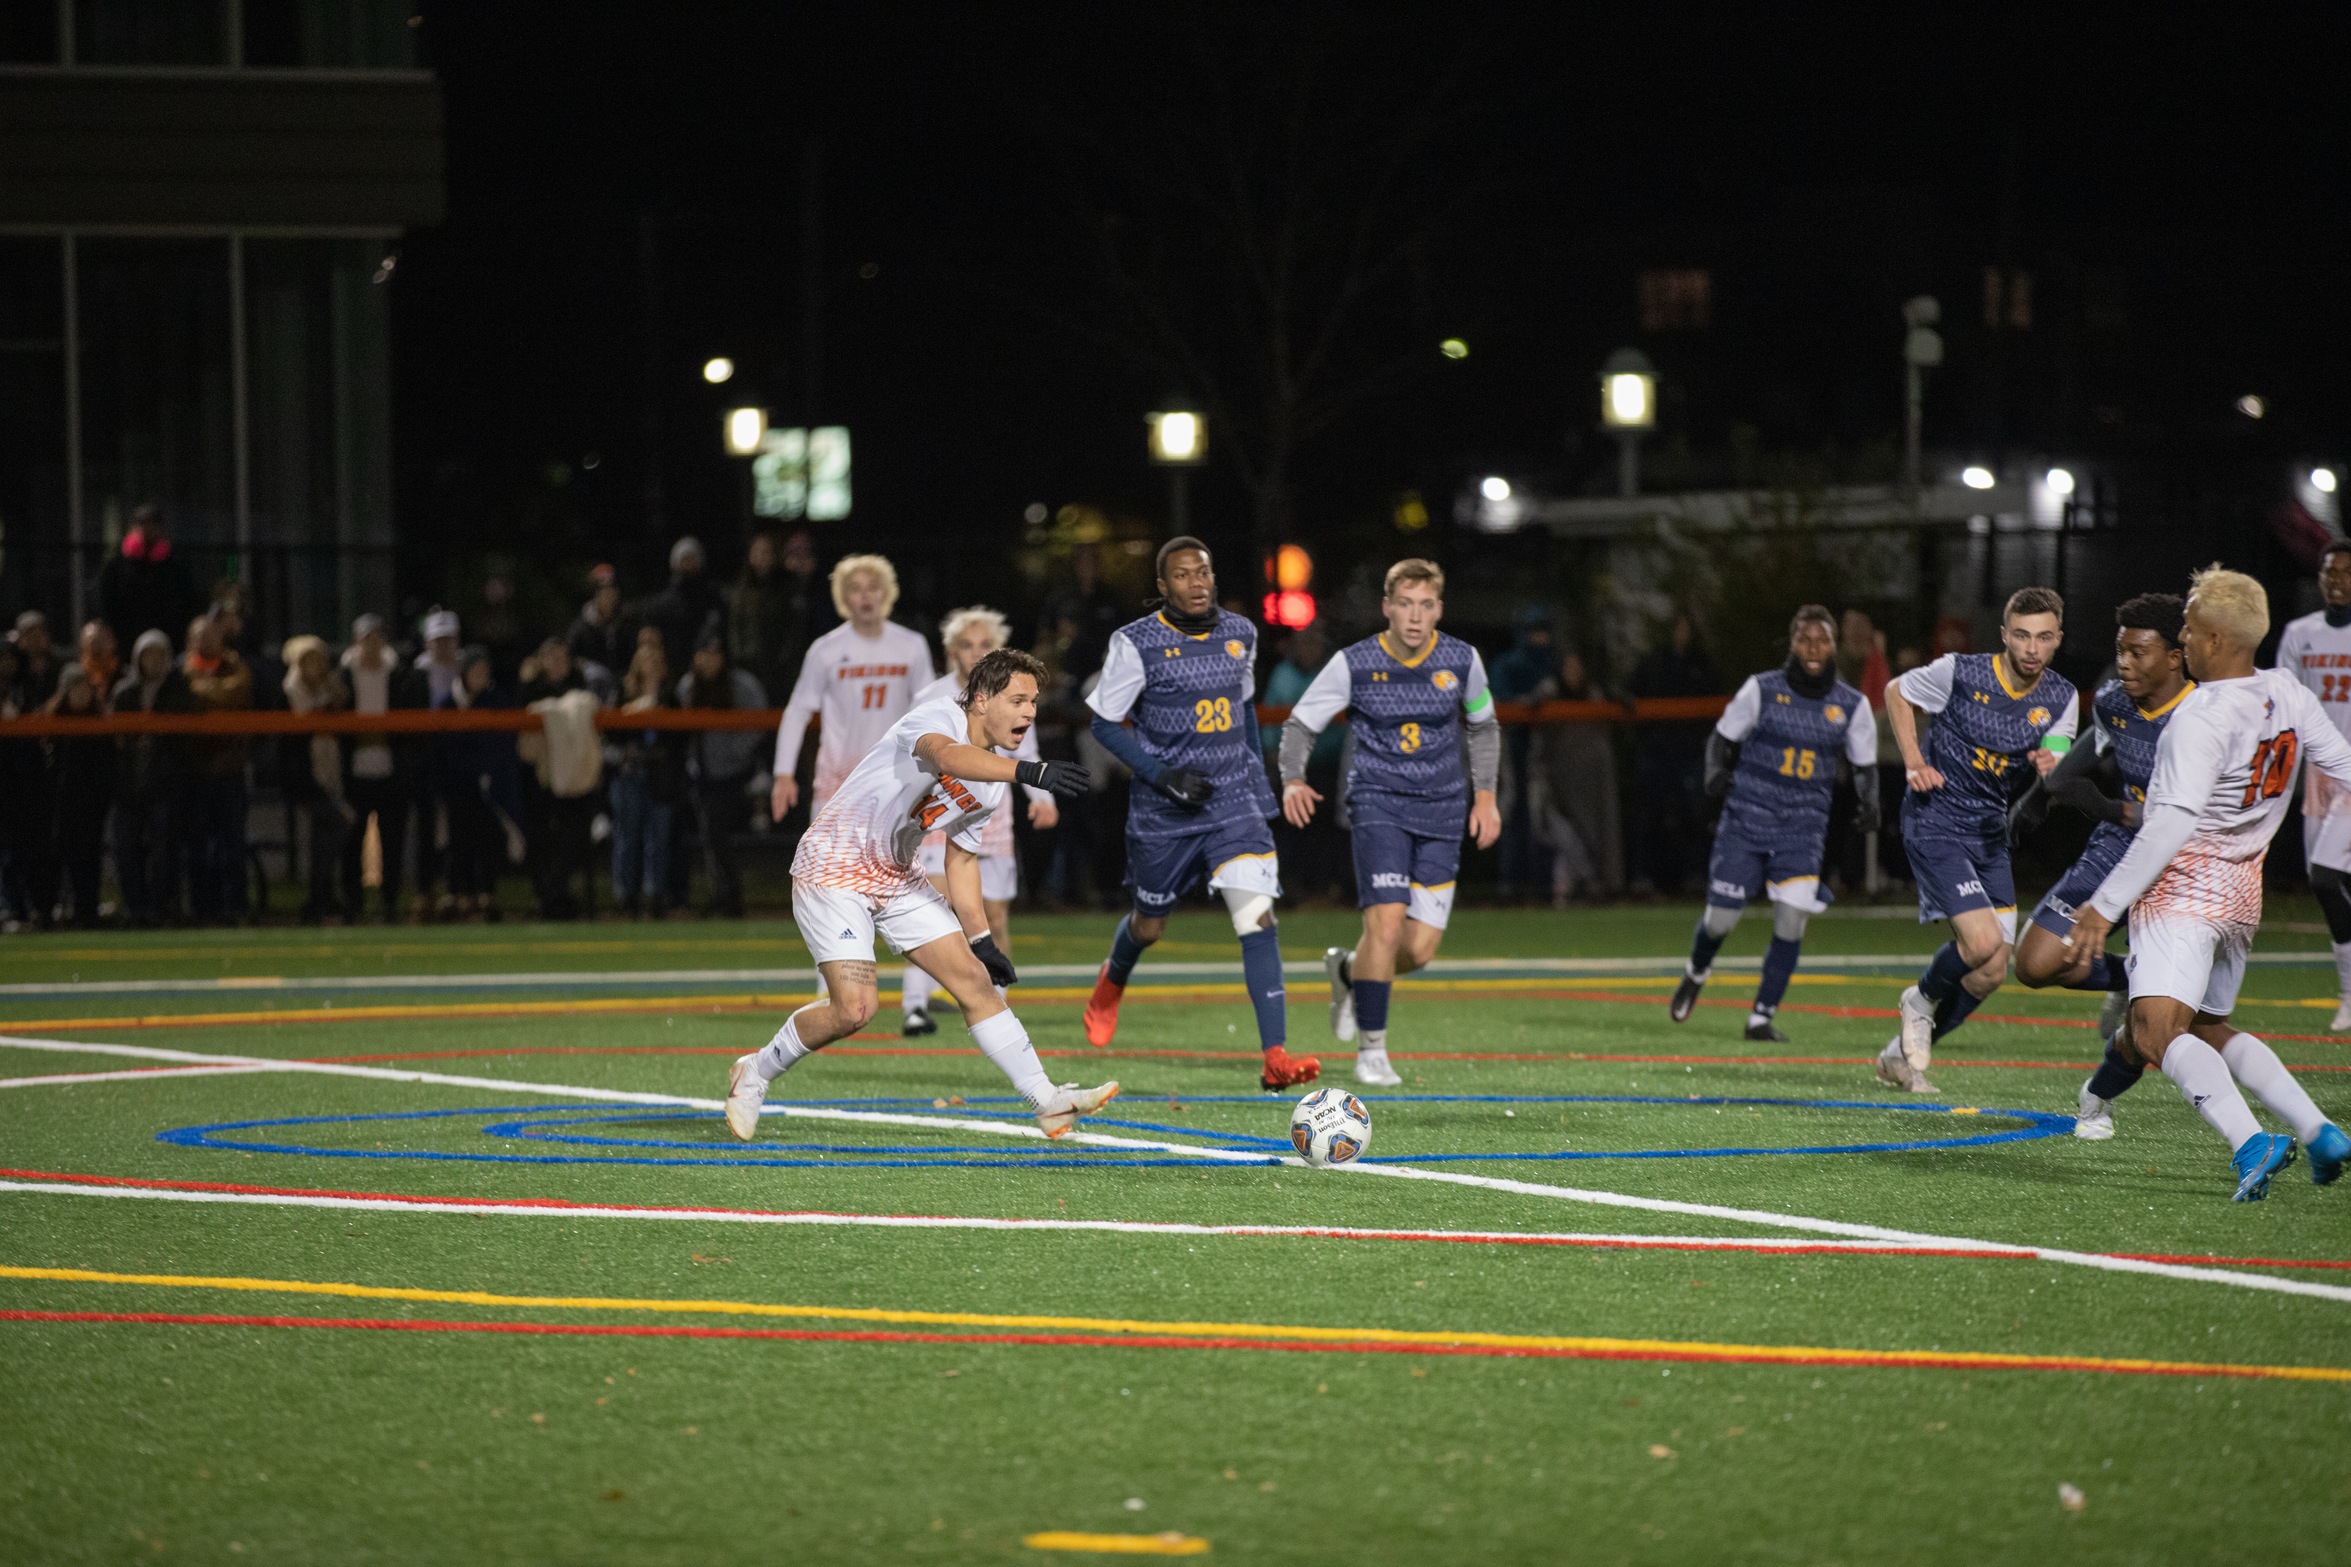 #1 Seed Salem State Cruises 5-0 Over # 5 Seed MCLA to Reach MASCAC Championship Game